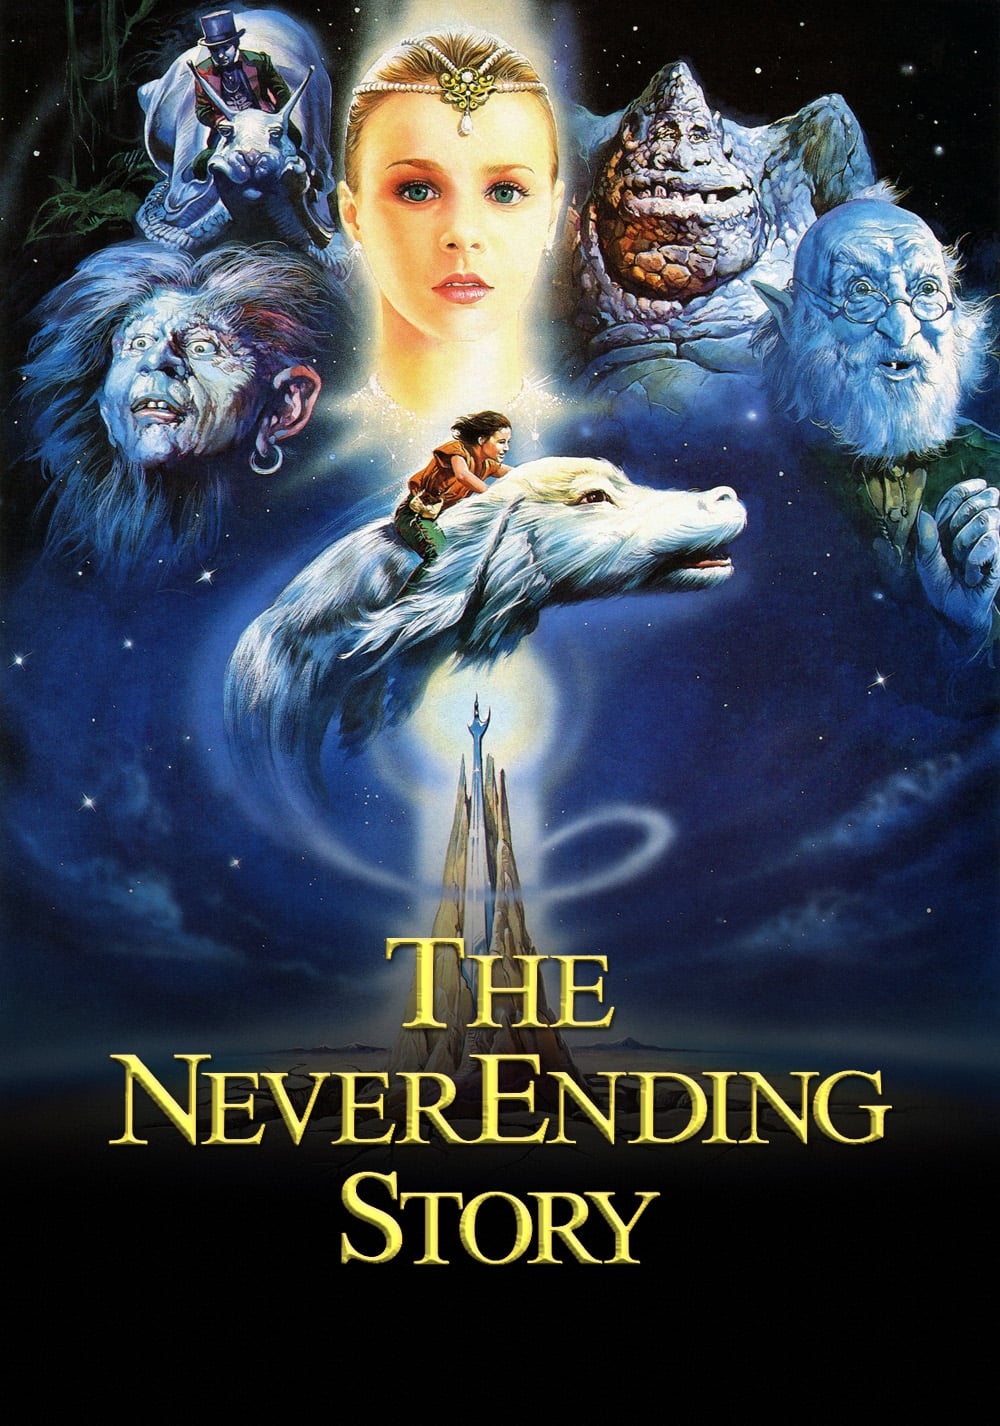 The Neverending Story 1984 Watchrs Club